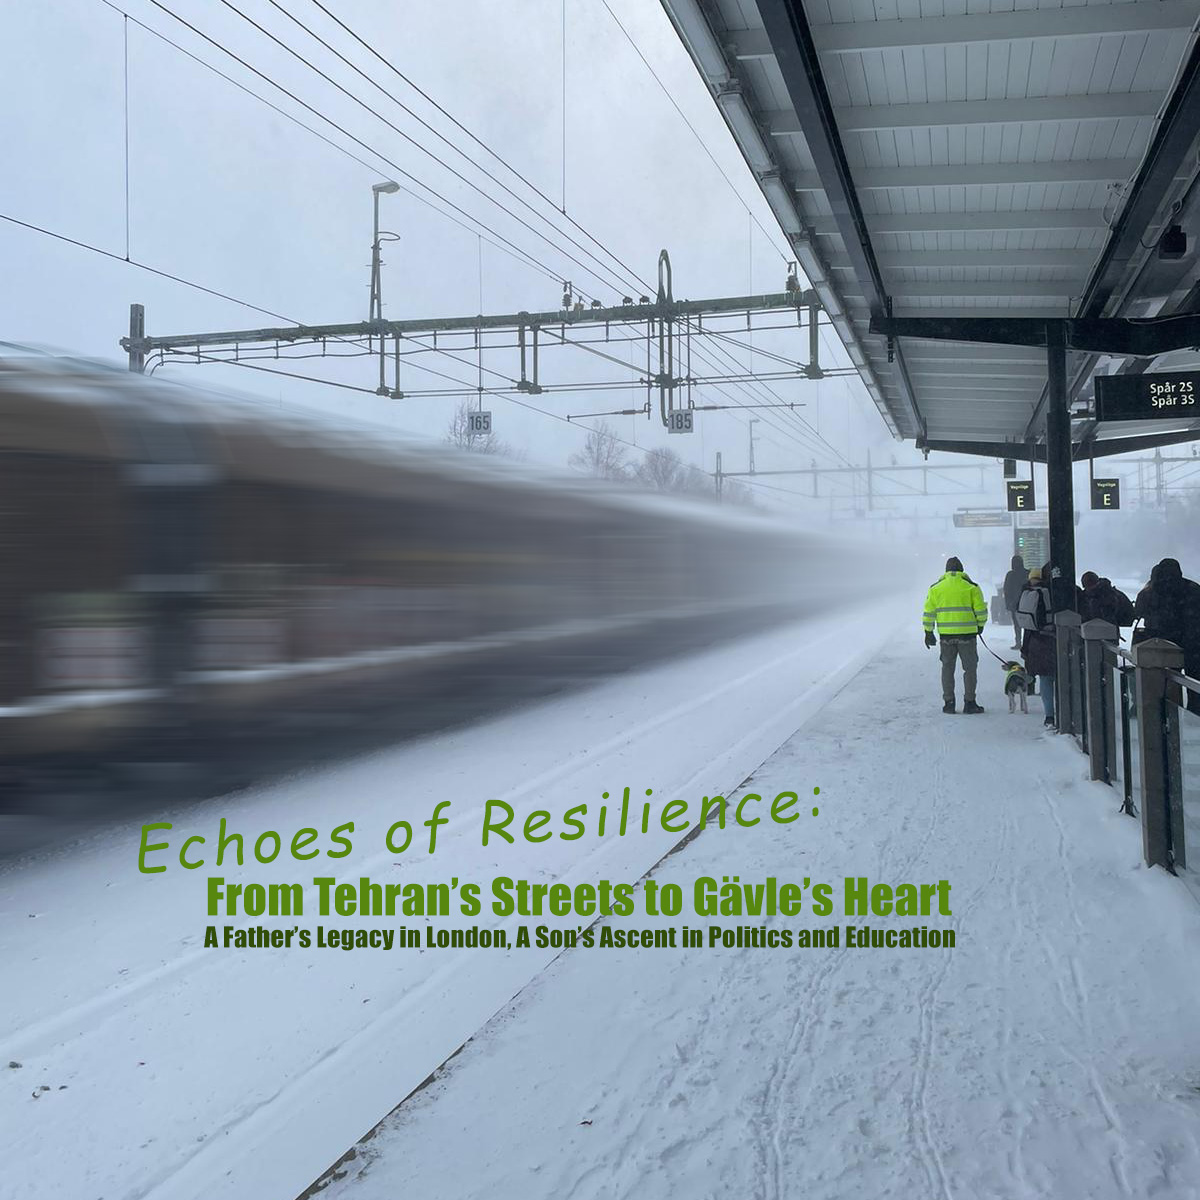 Echoes of Resilience